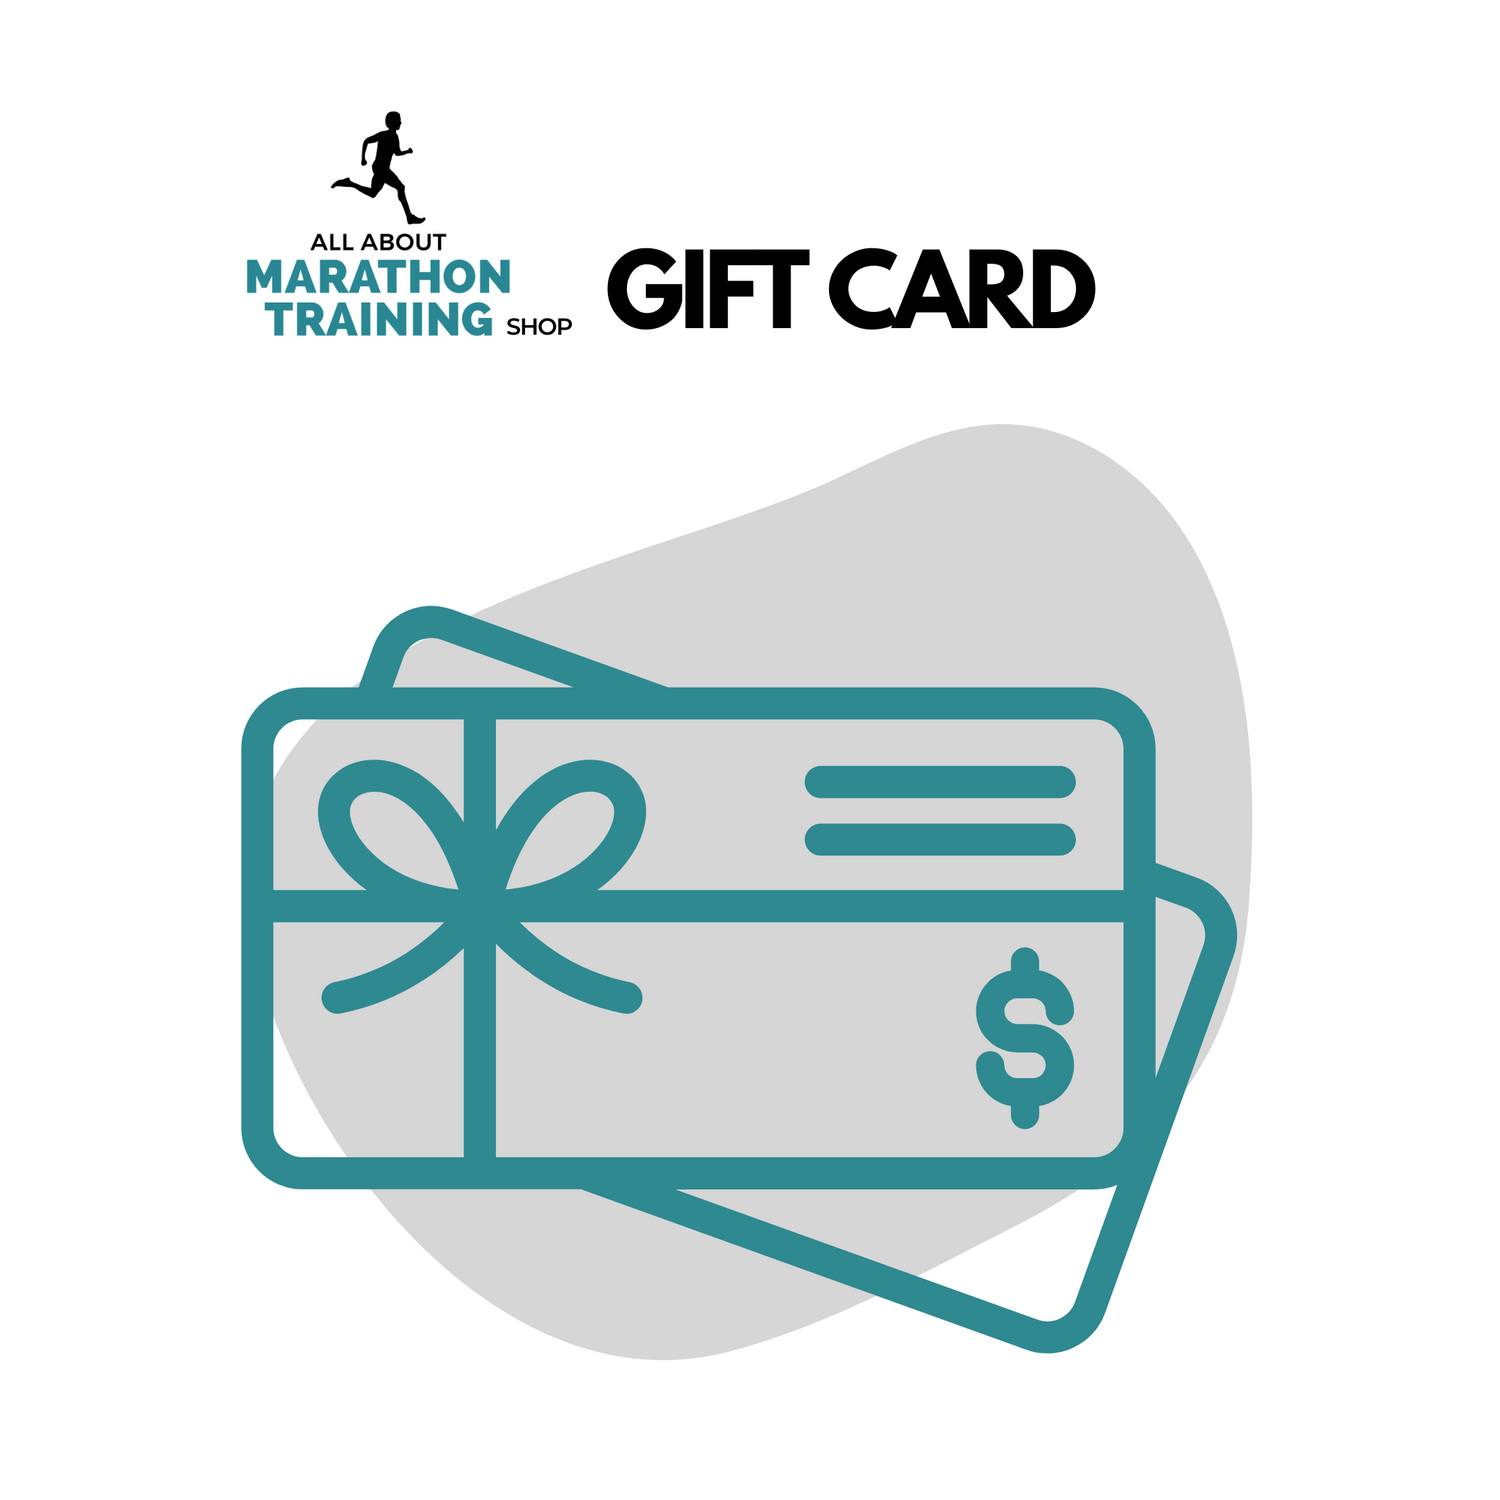 All About Marathon Training Gift Card